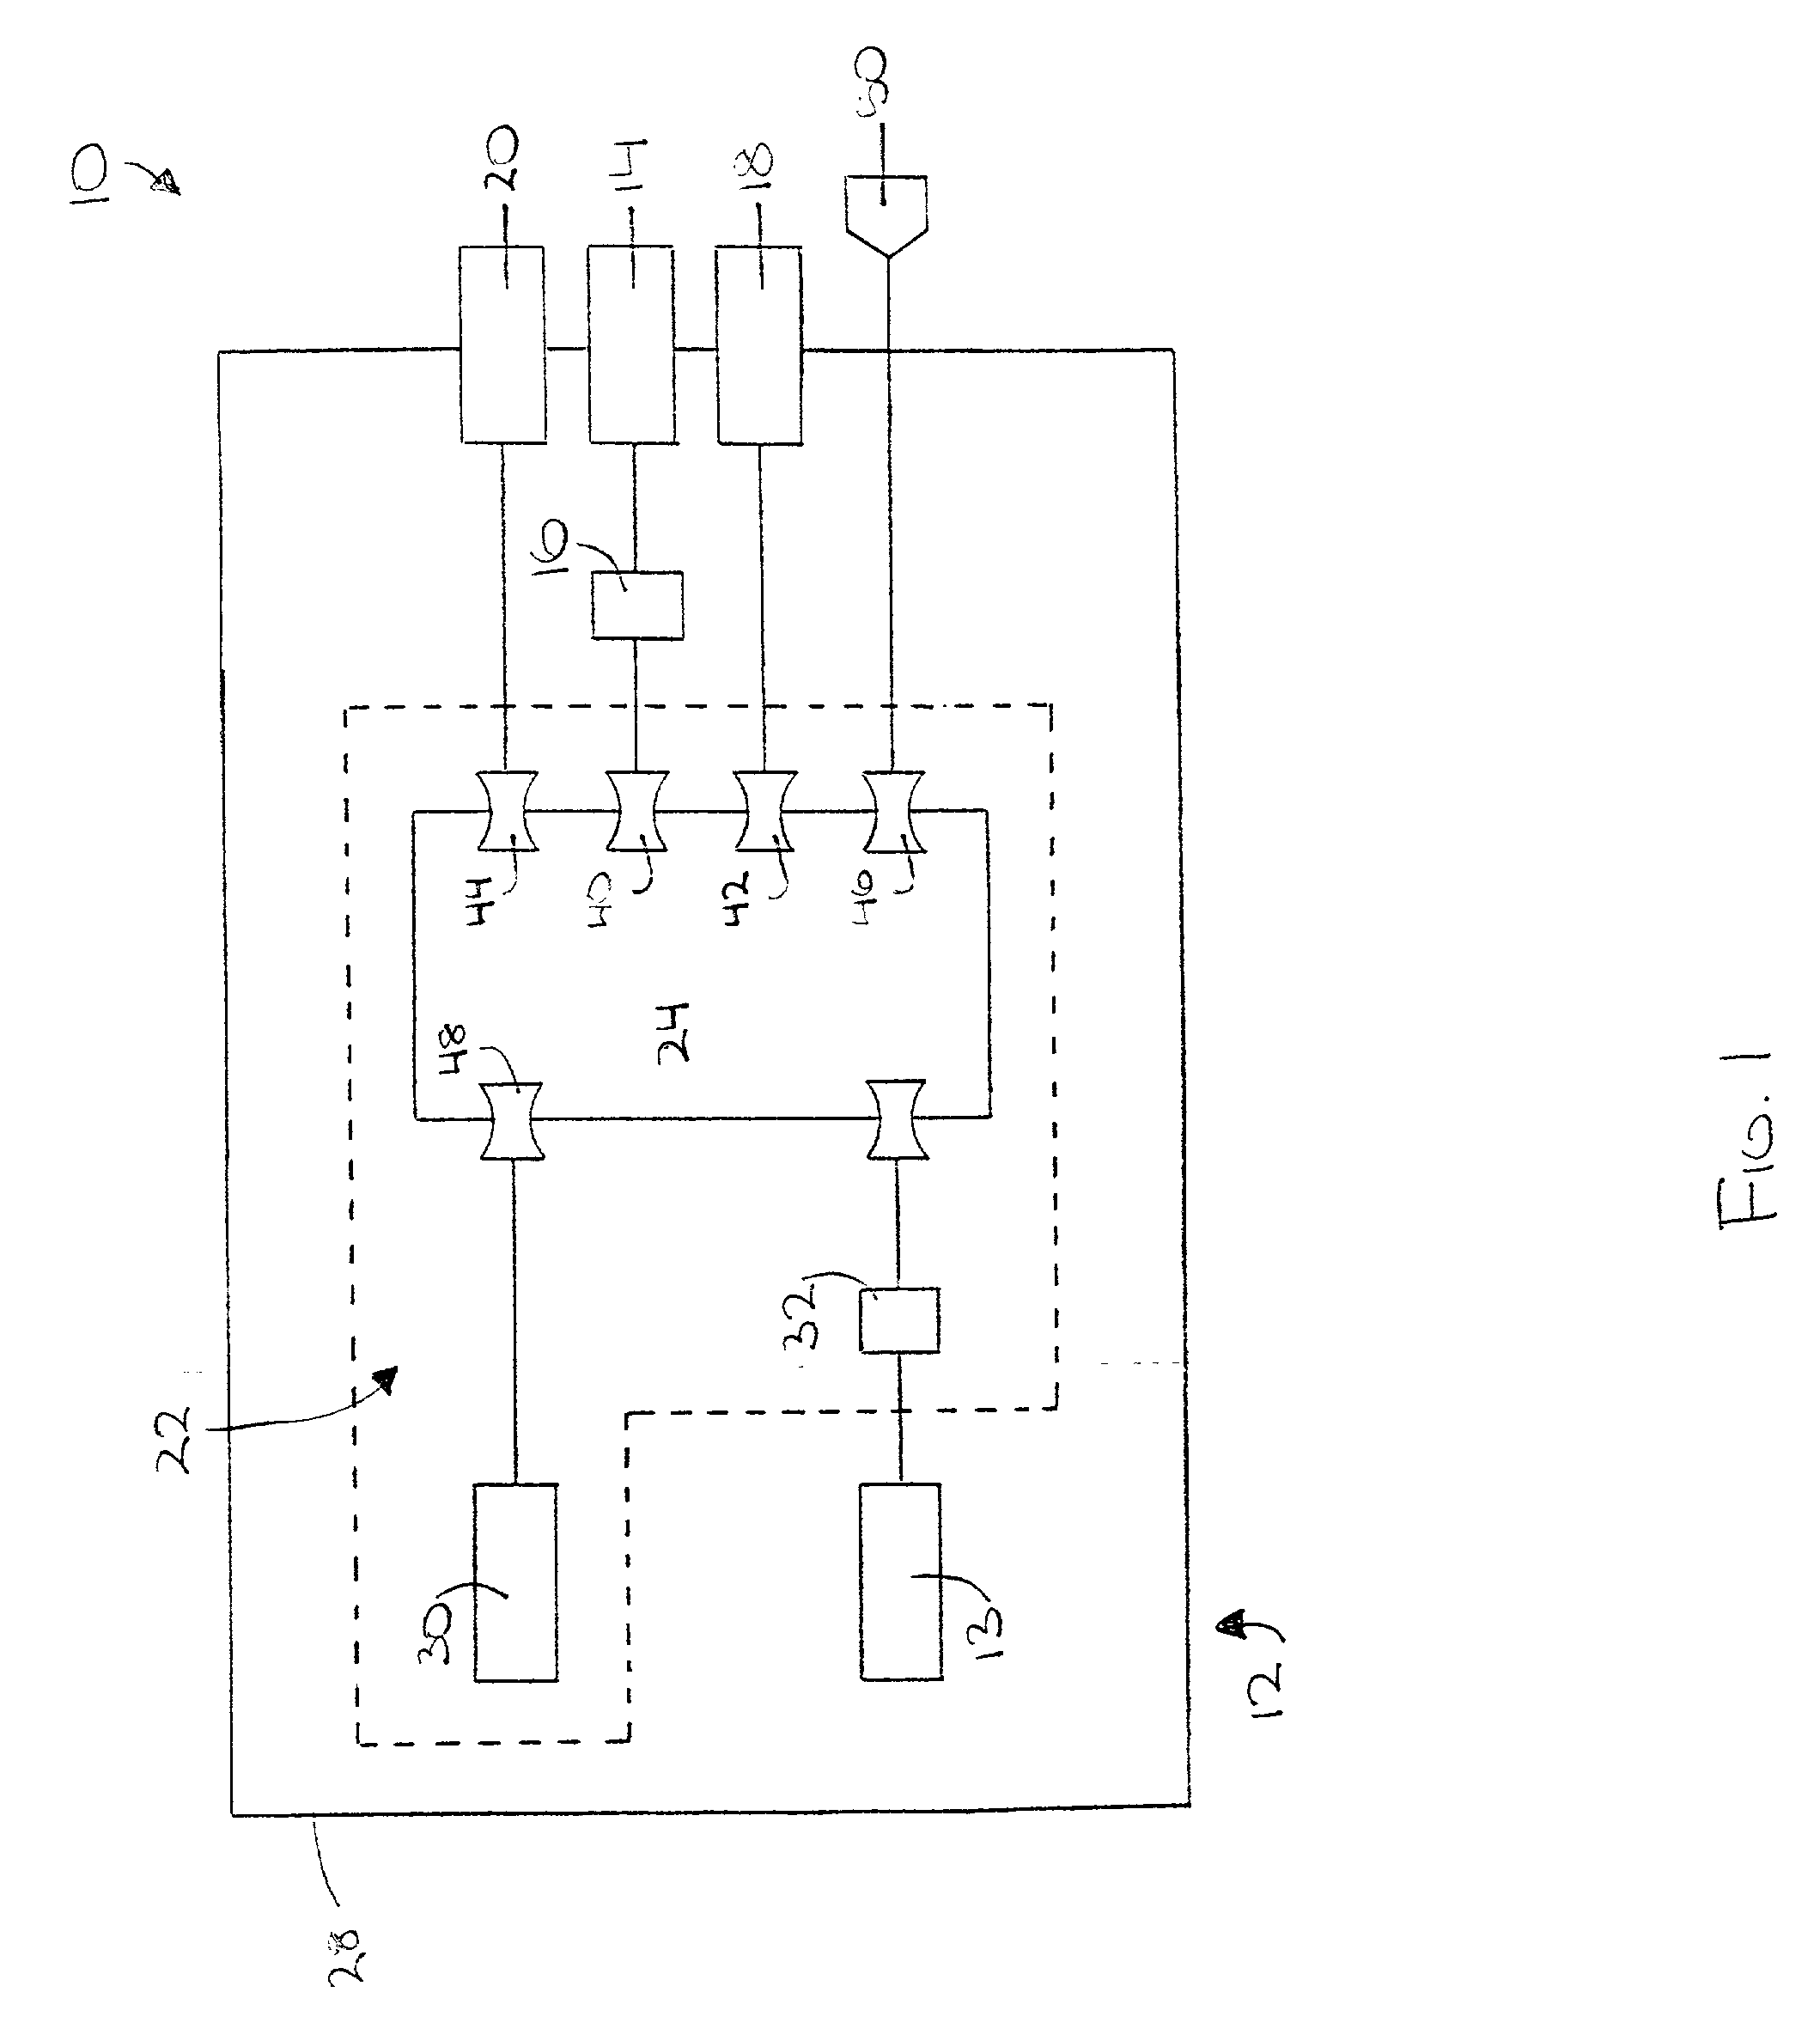 System for controlling use of and access to a communication device or other second system based upon an identifying biological characteristic of a user